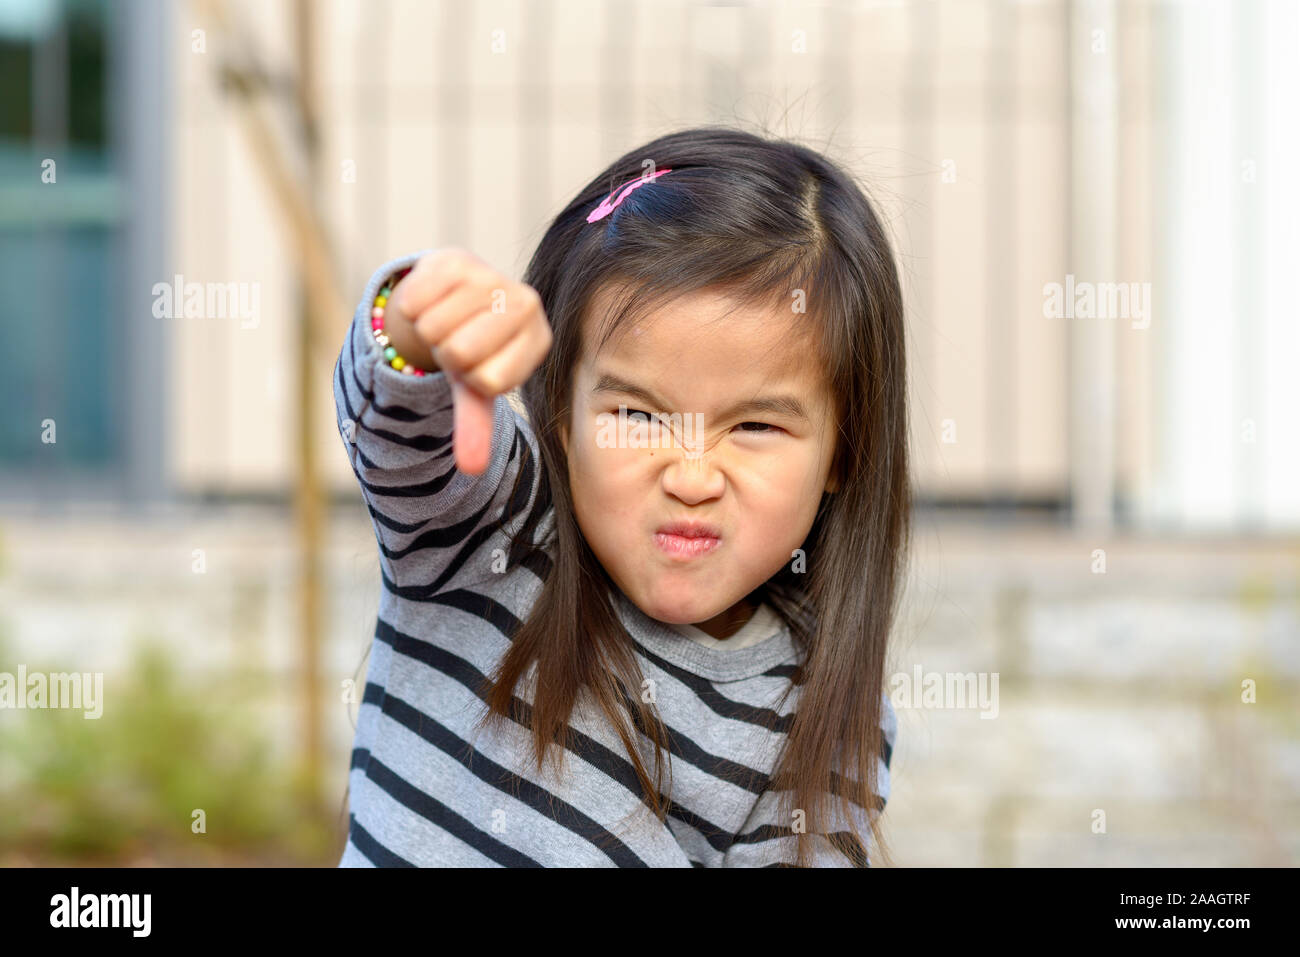 Angry little Asian girl punching her fist at the camera while pulling a fierce face in a show of childish aggression Stock Photo